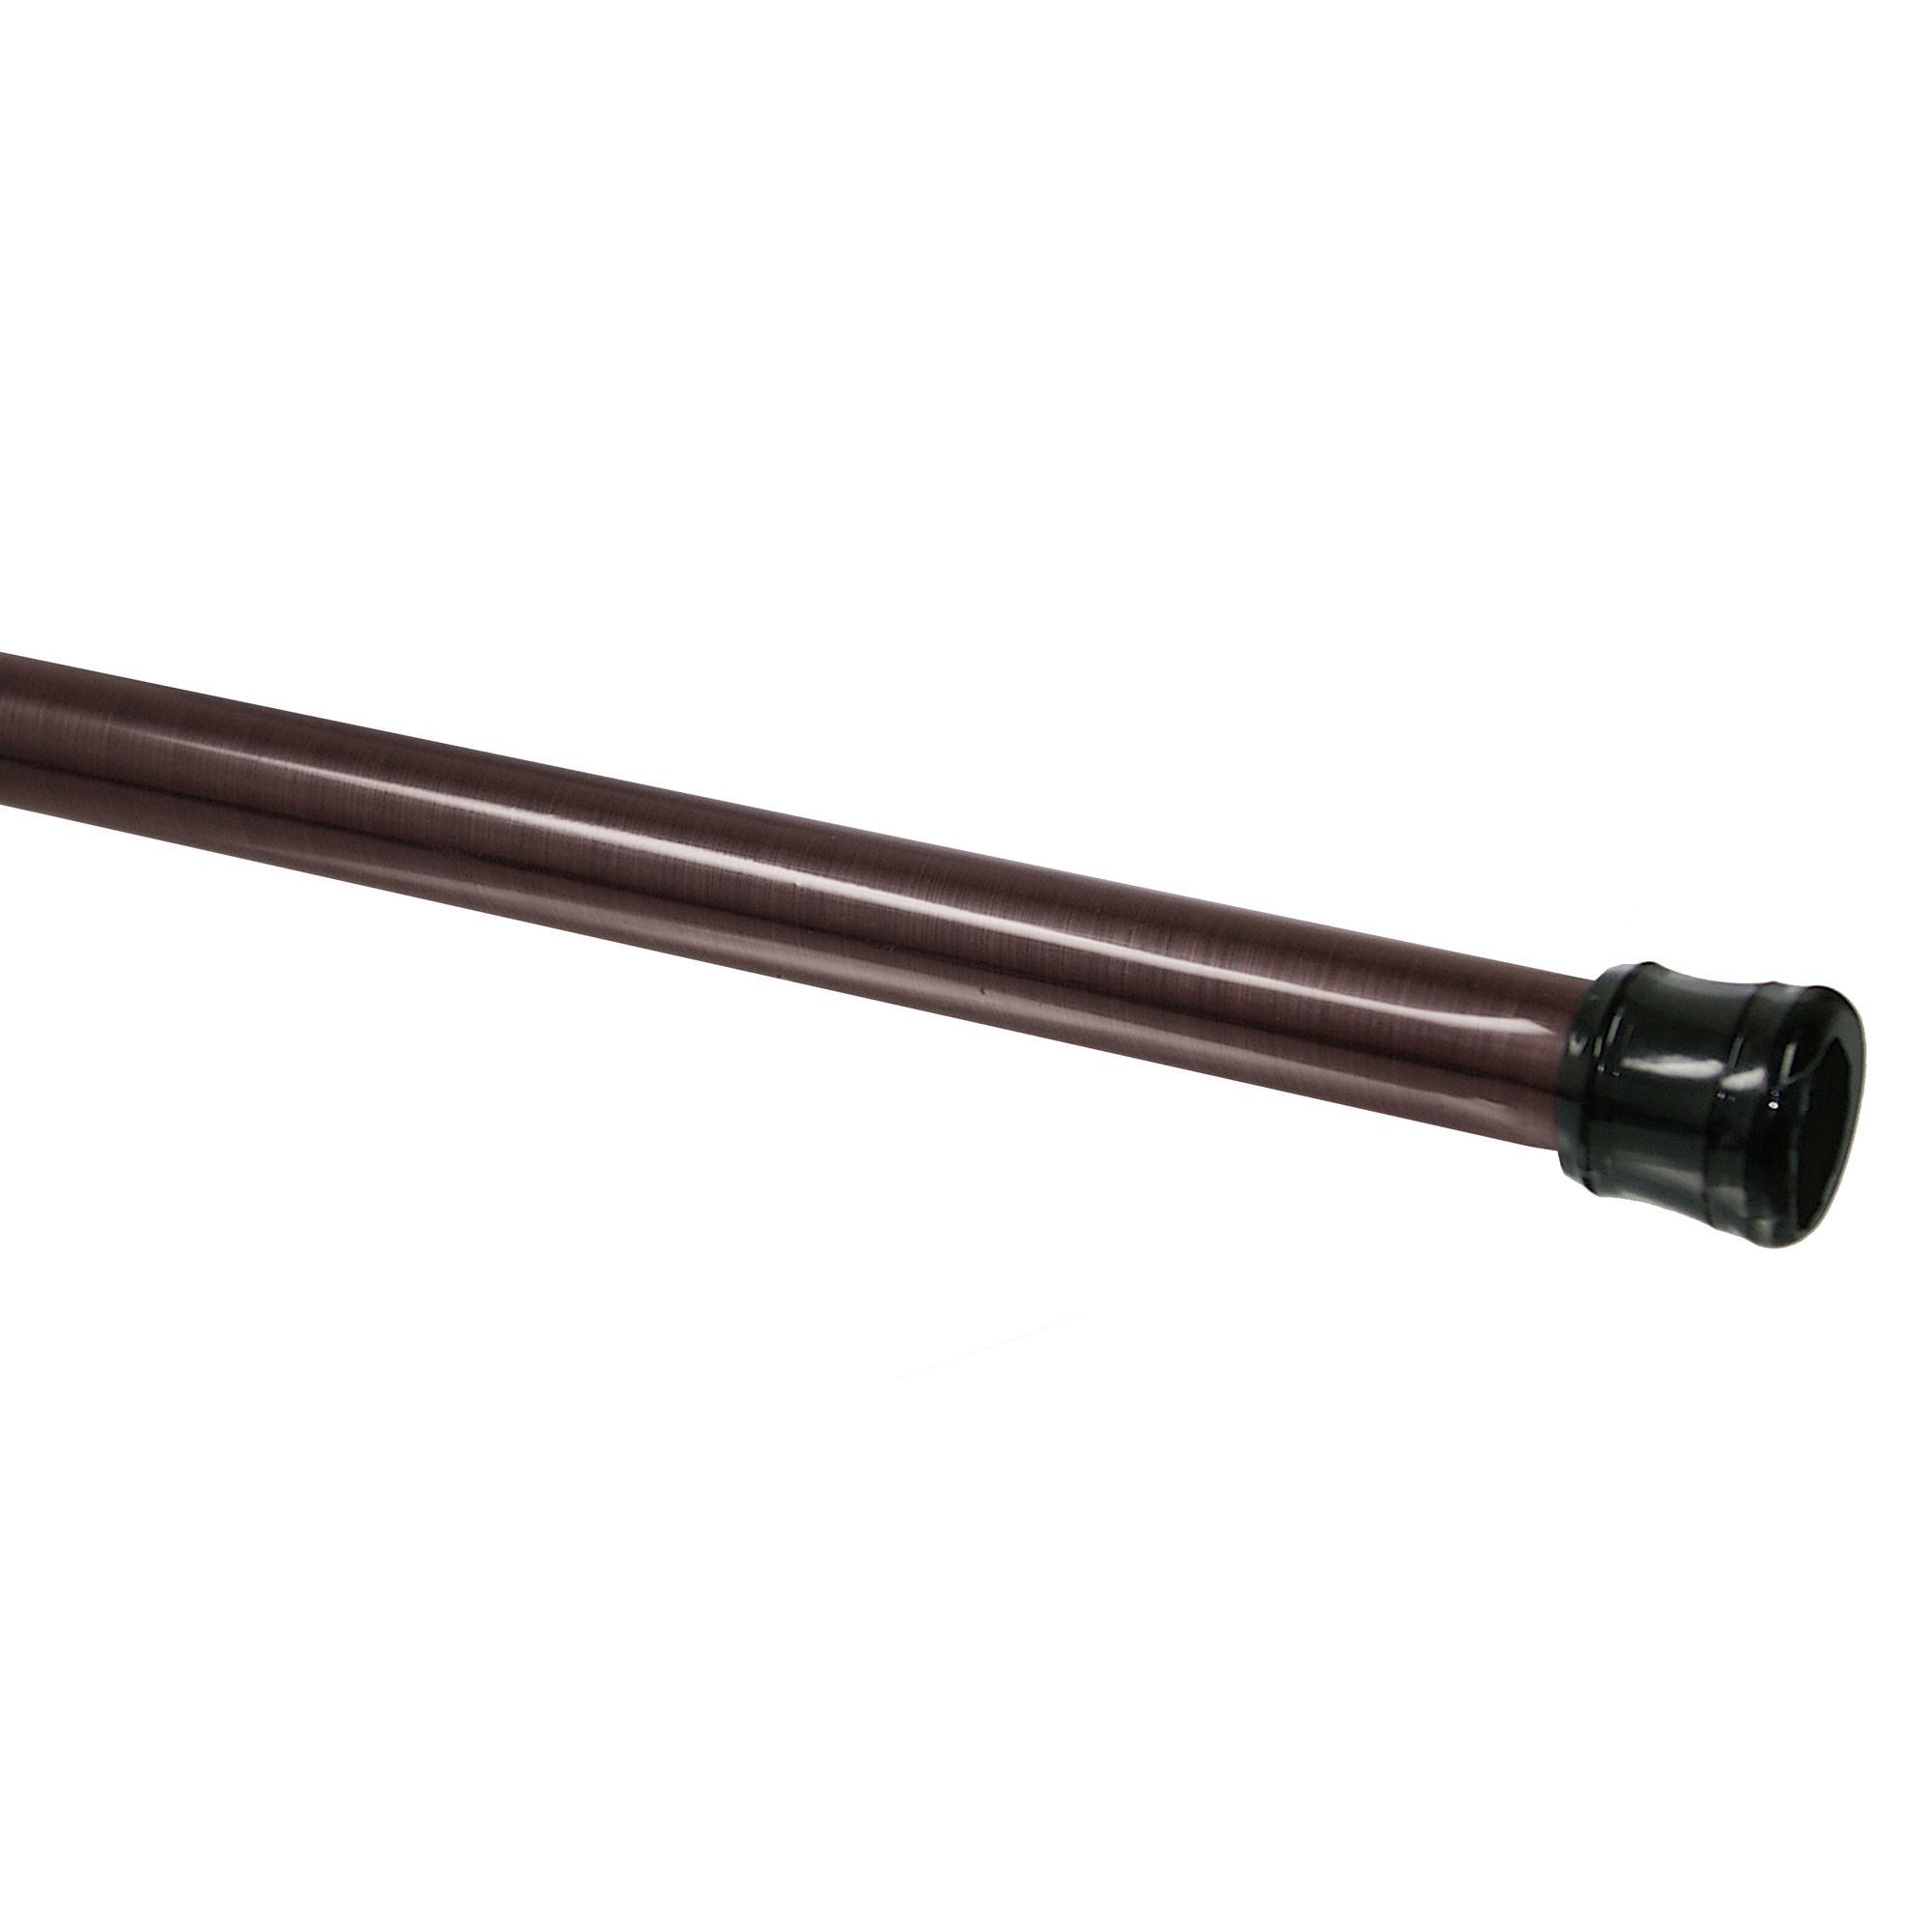 Essential Home 72 in. Oil Rubbed Bronze Shower Curtain Rod